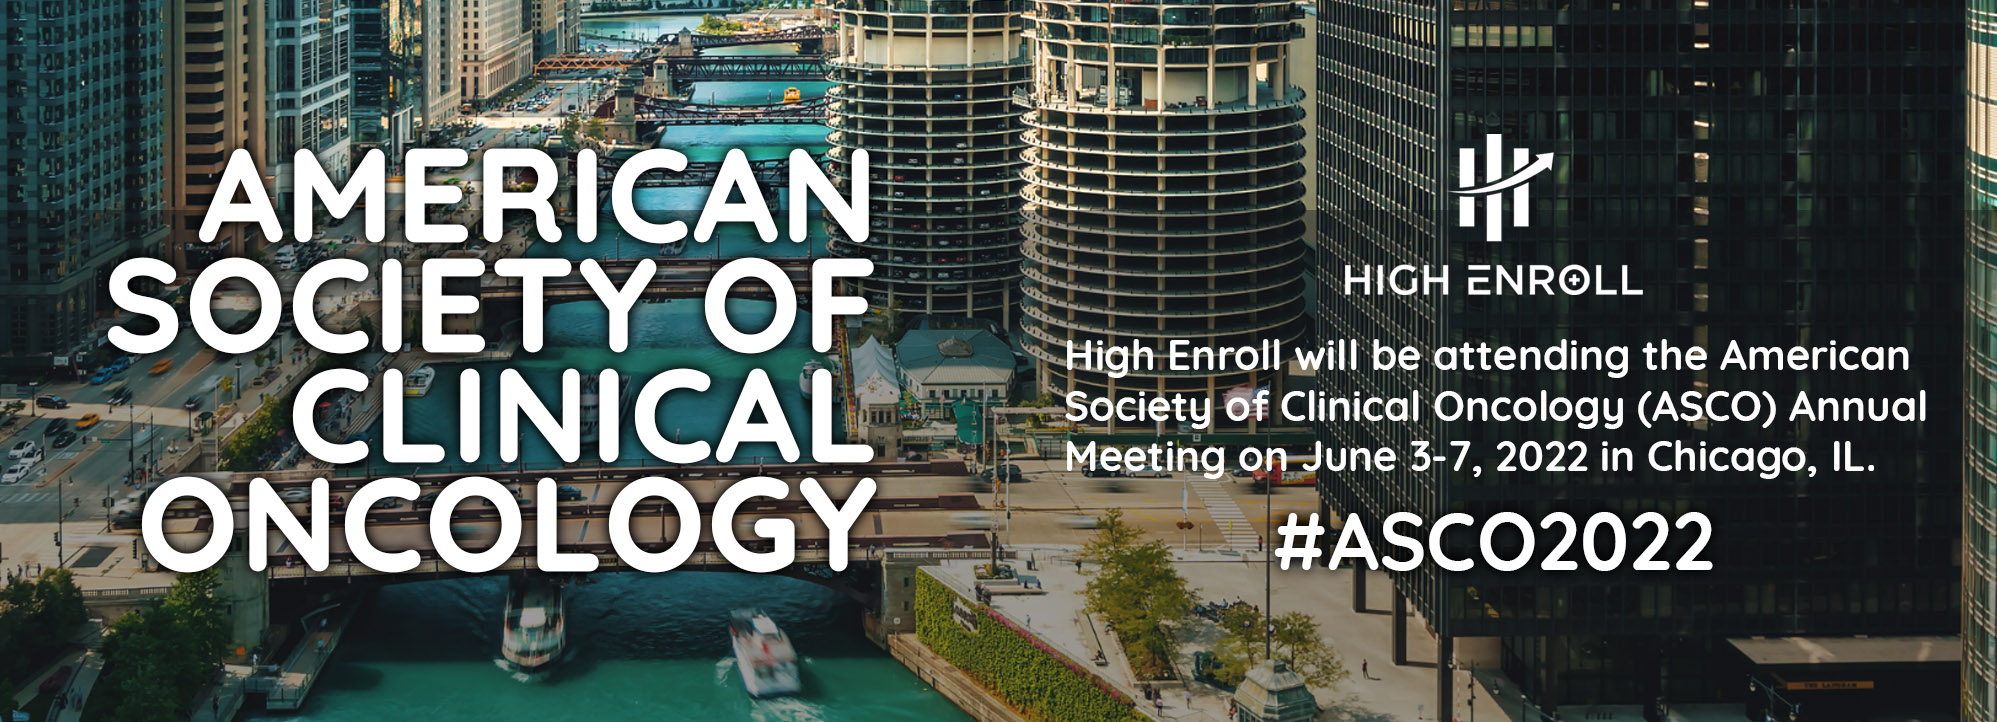 High Enroll at the American Society of Clinical Oncology (ASCO) High